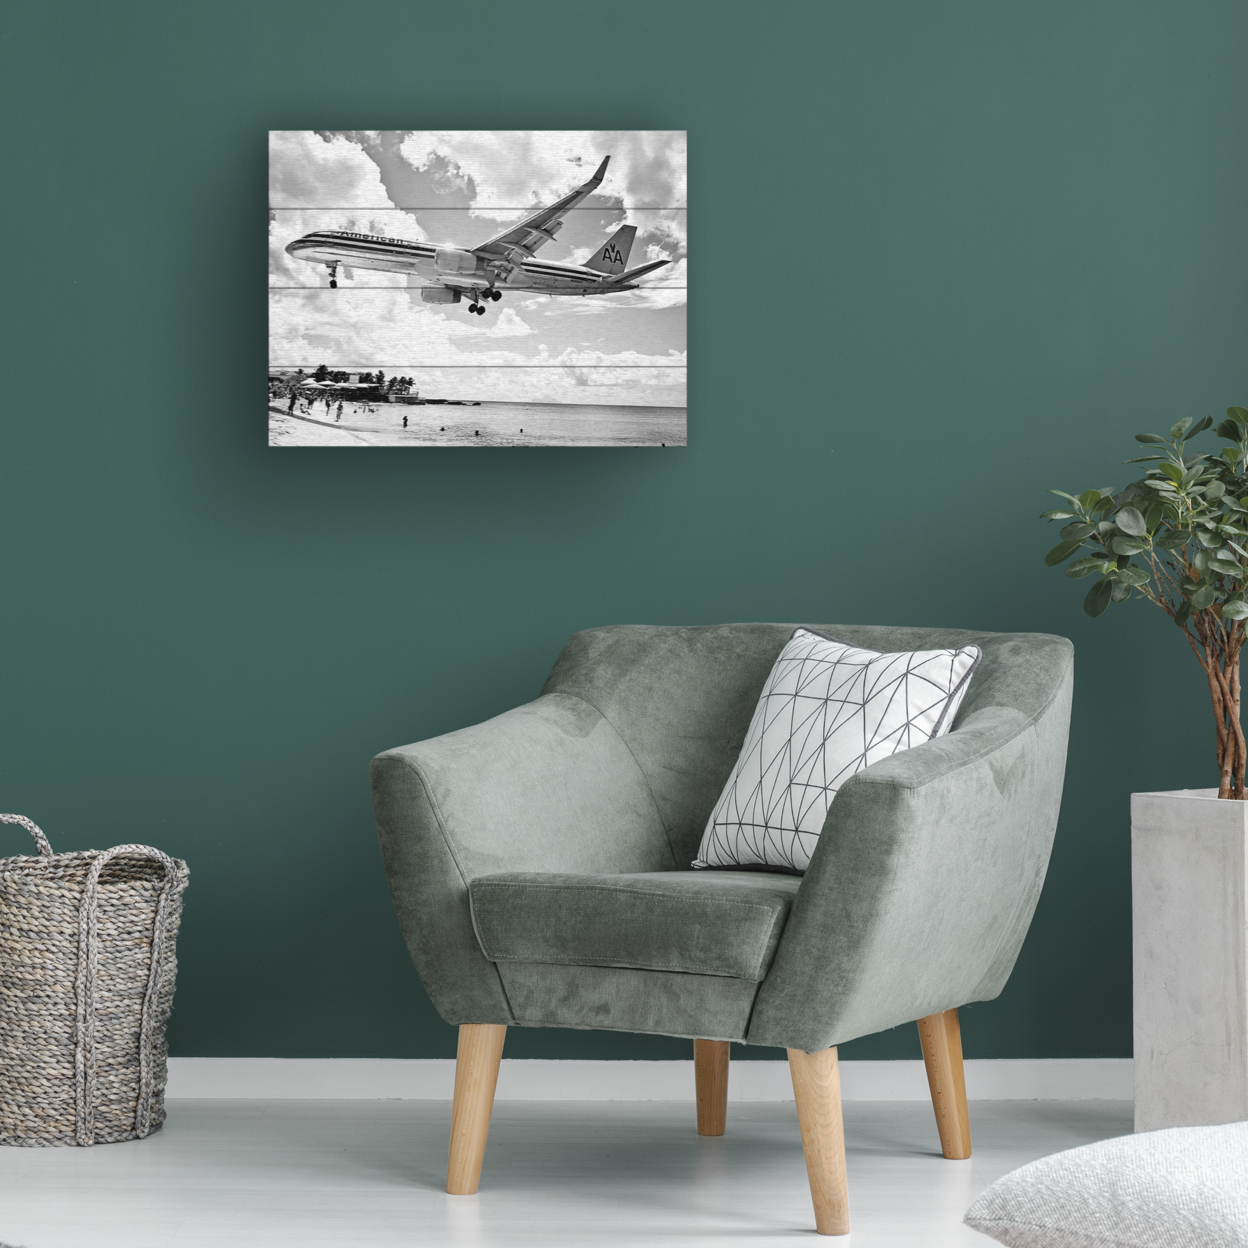 Wall Art 12 X 16 Inches Titled American Airliner Ready To Hang Printed On Wooden Planks